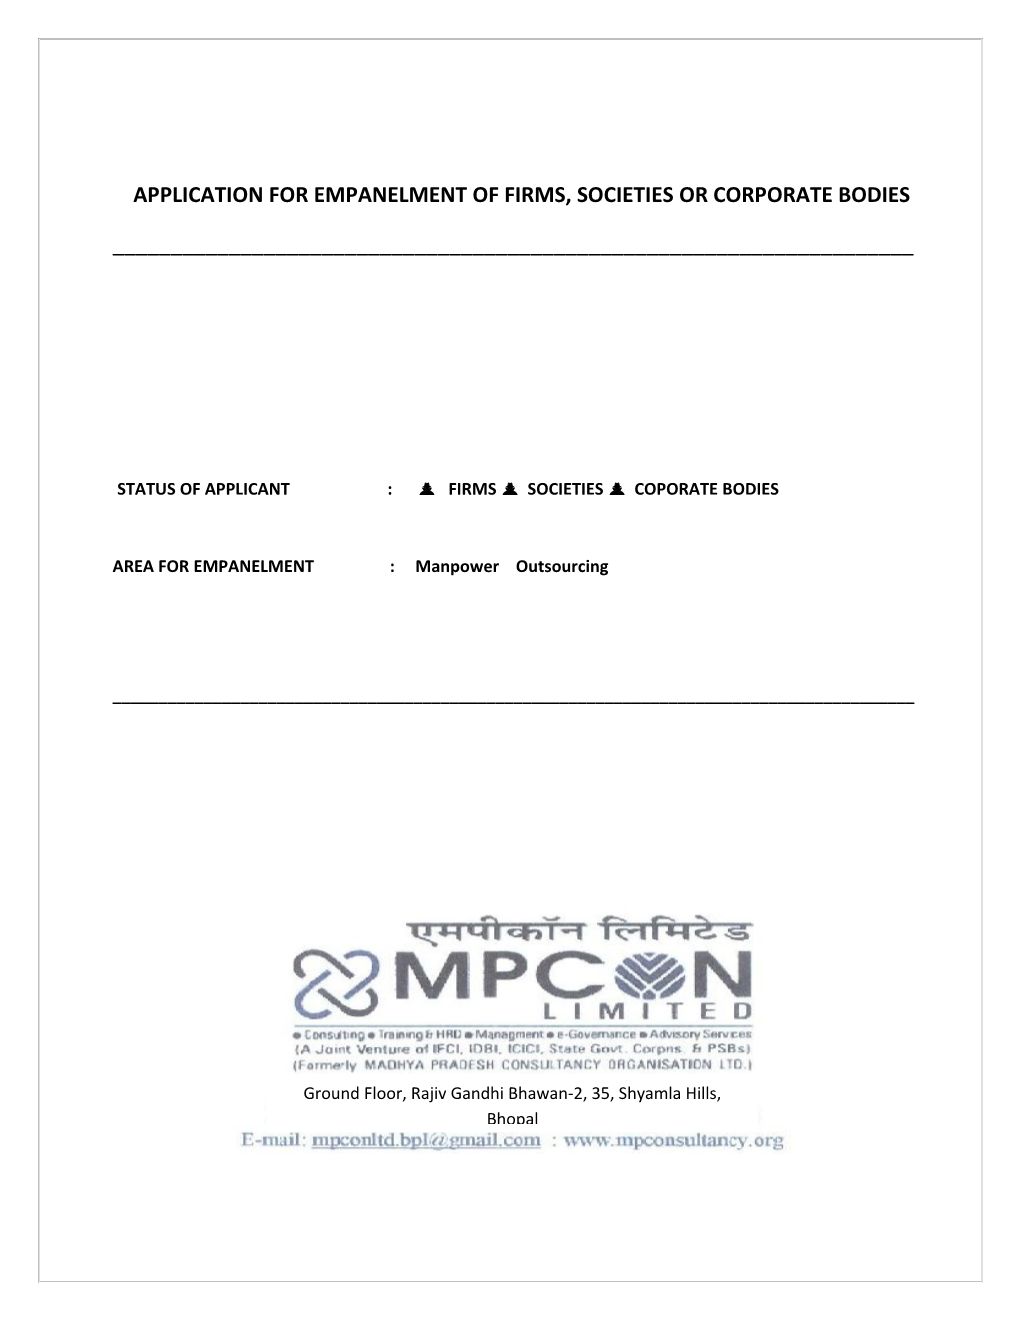 Application for Empanelment of Firms, Societies Or Corporate Bodies